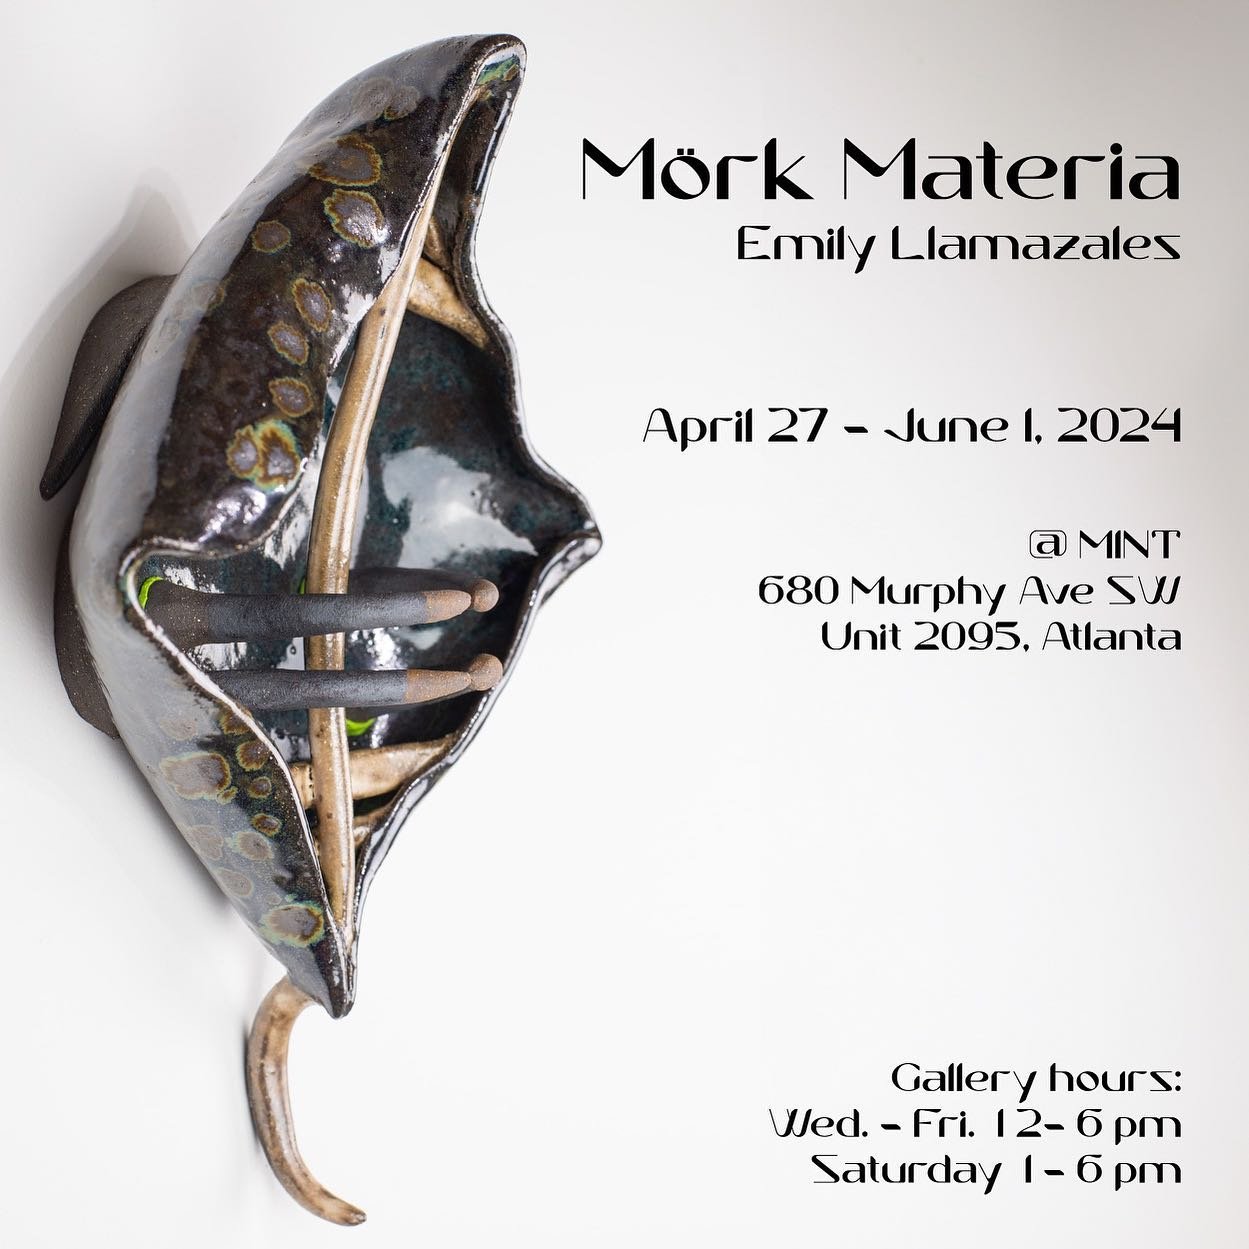 Today is the day! Emily Llamazales takes us to another world with her exhibition &ldquo;M&ouml;rk Materia&rdquo;. 
Join us tonight from 6:00pm - 9:00pm for two exhibit openings at MINT.

We will have food available to purchase from @boca.trmv ! See y